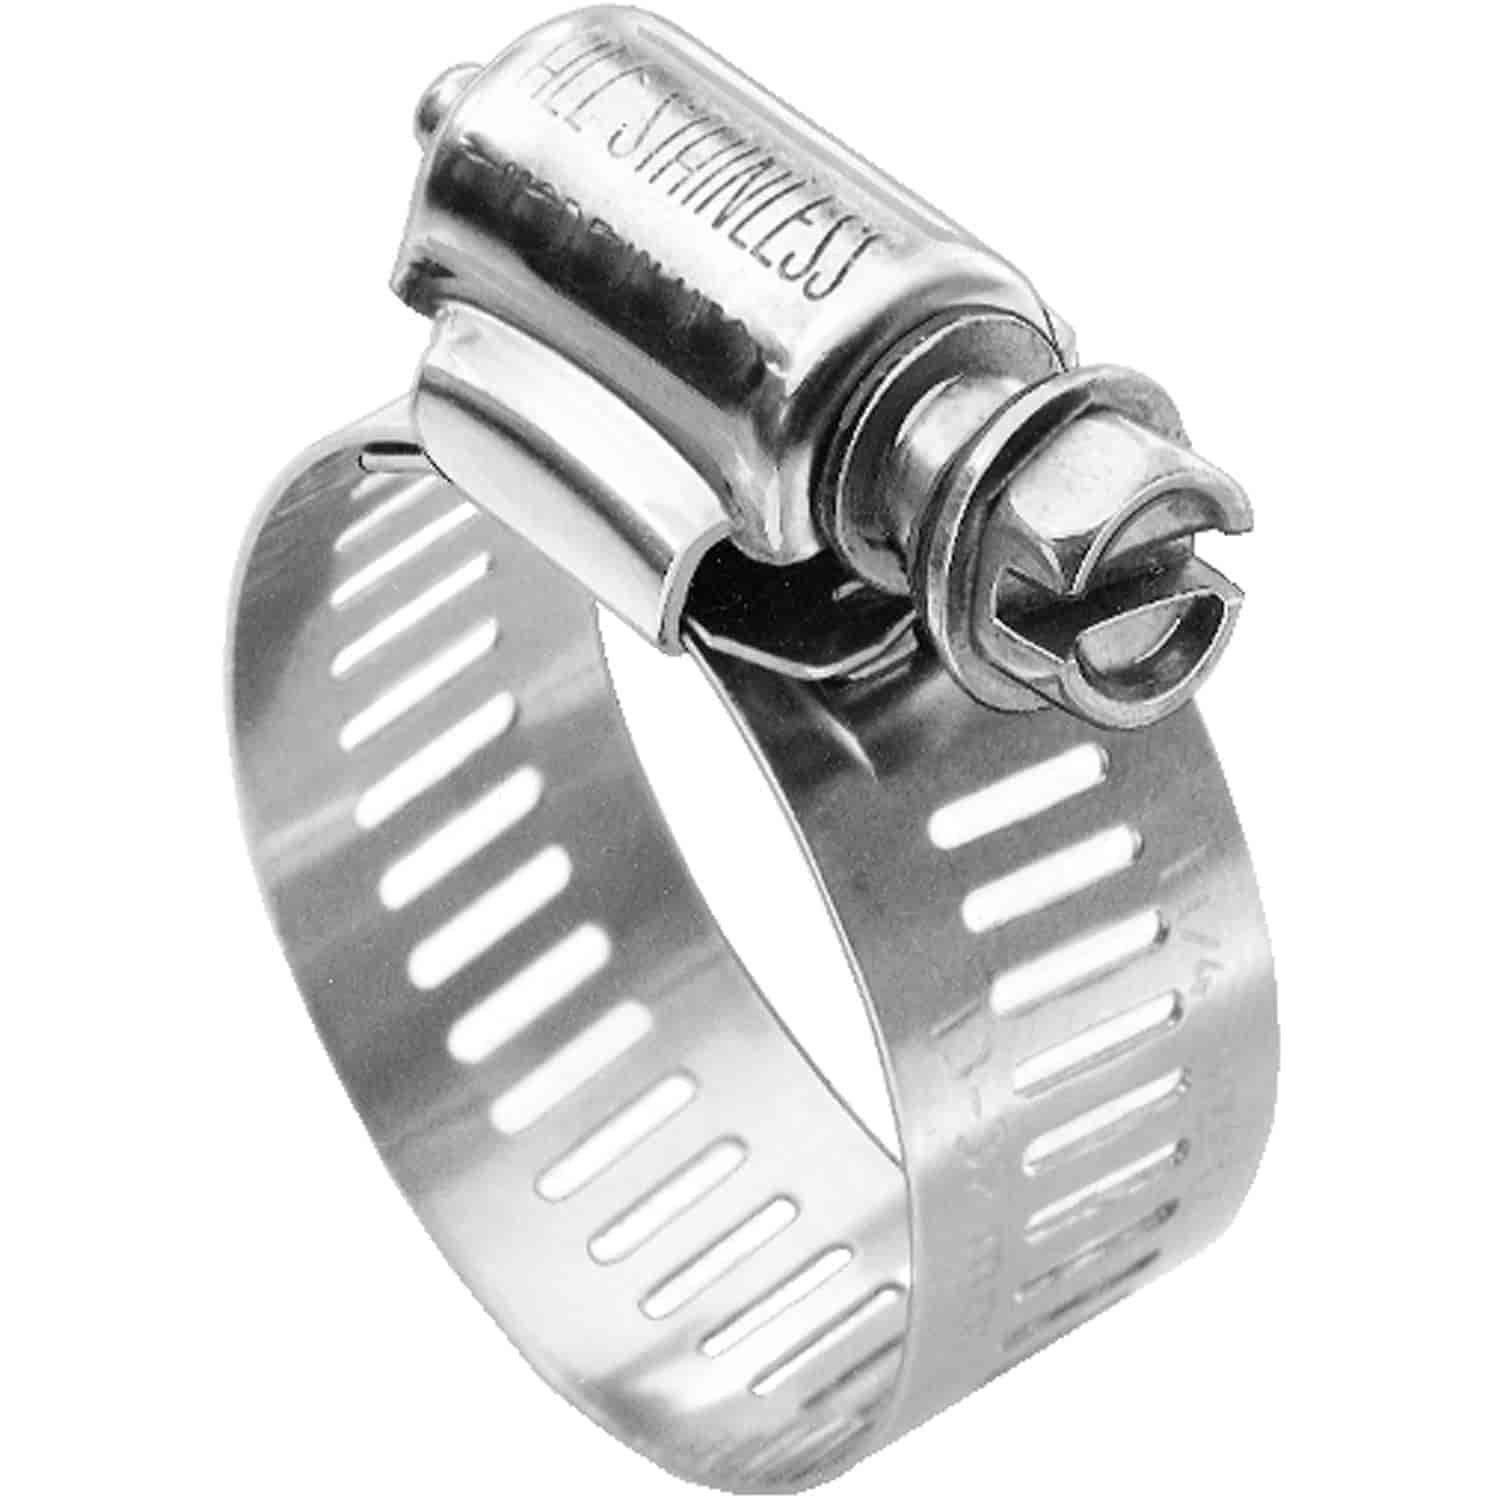 Stainless Steel Hose Clamp [7 in. to 4 in. Outside Diameter]